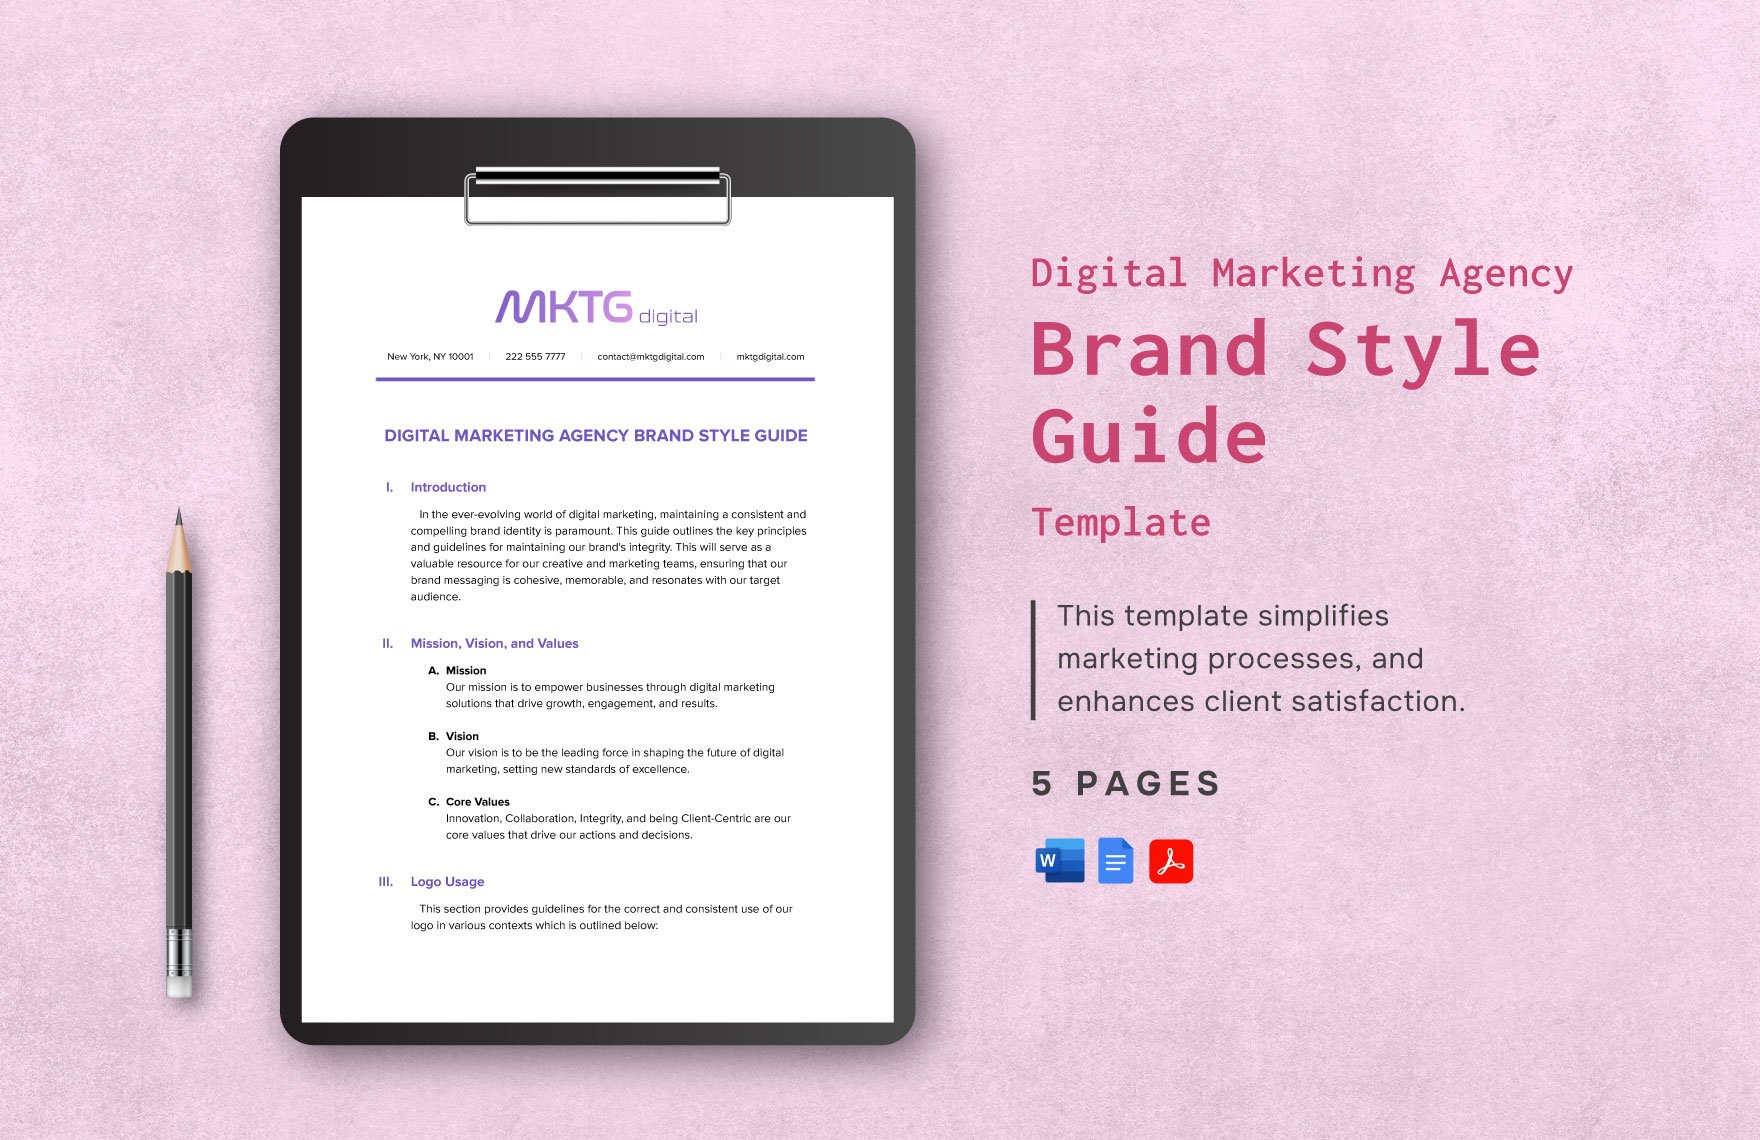 Digital Marketing Agency Brand Style Guide Template